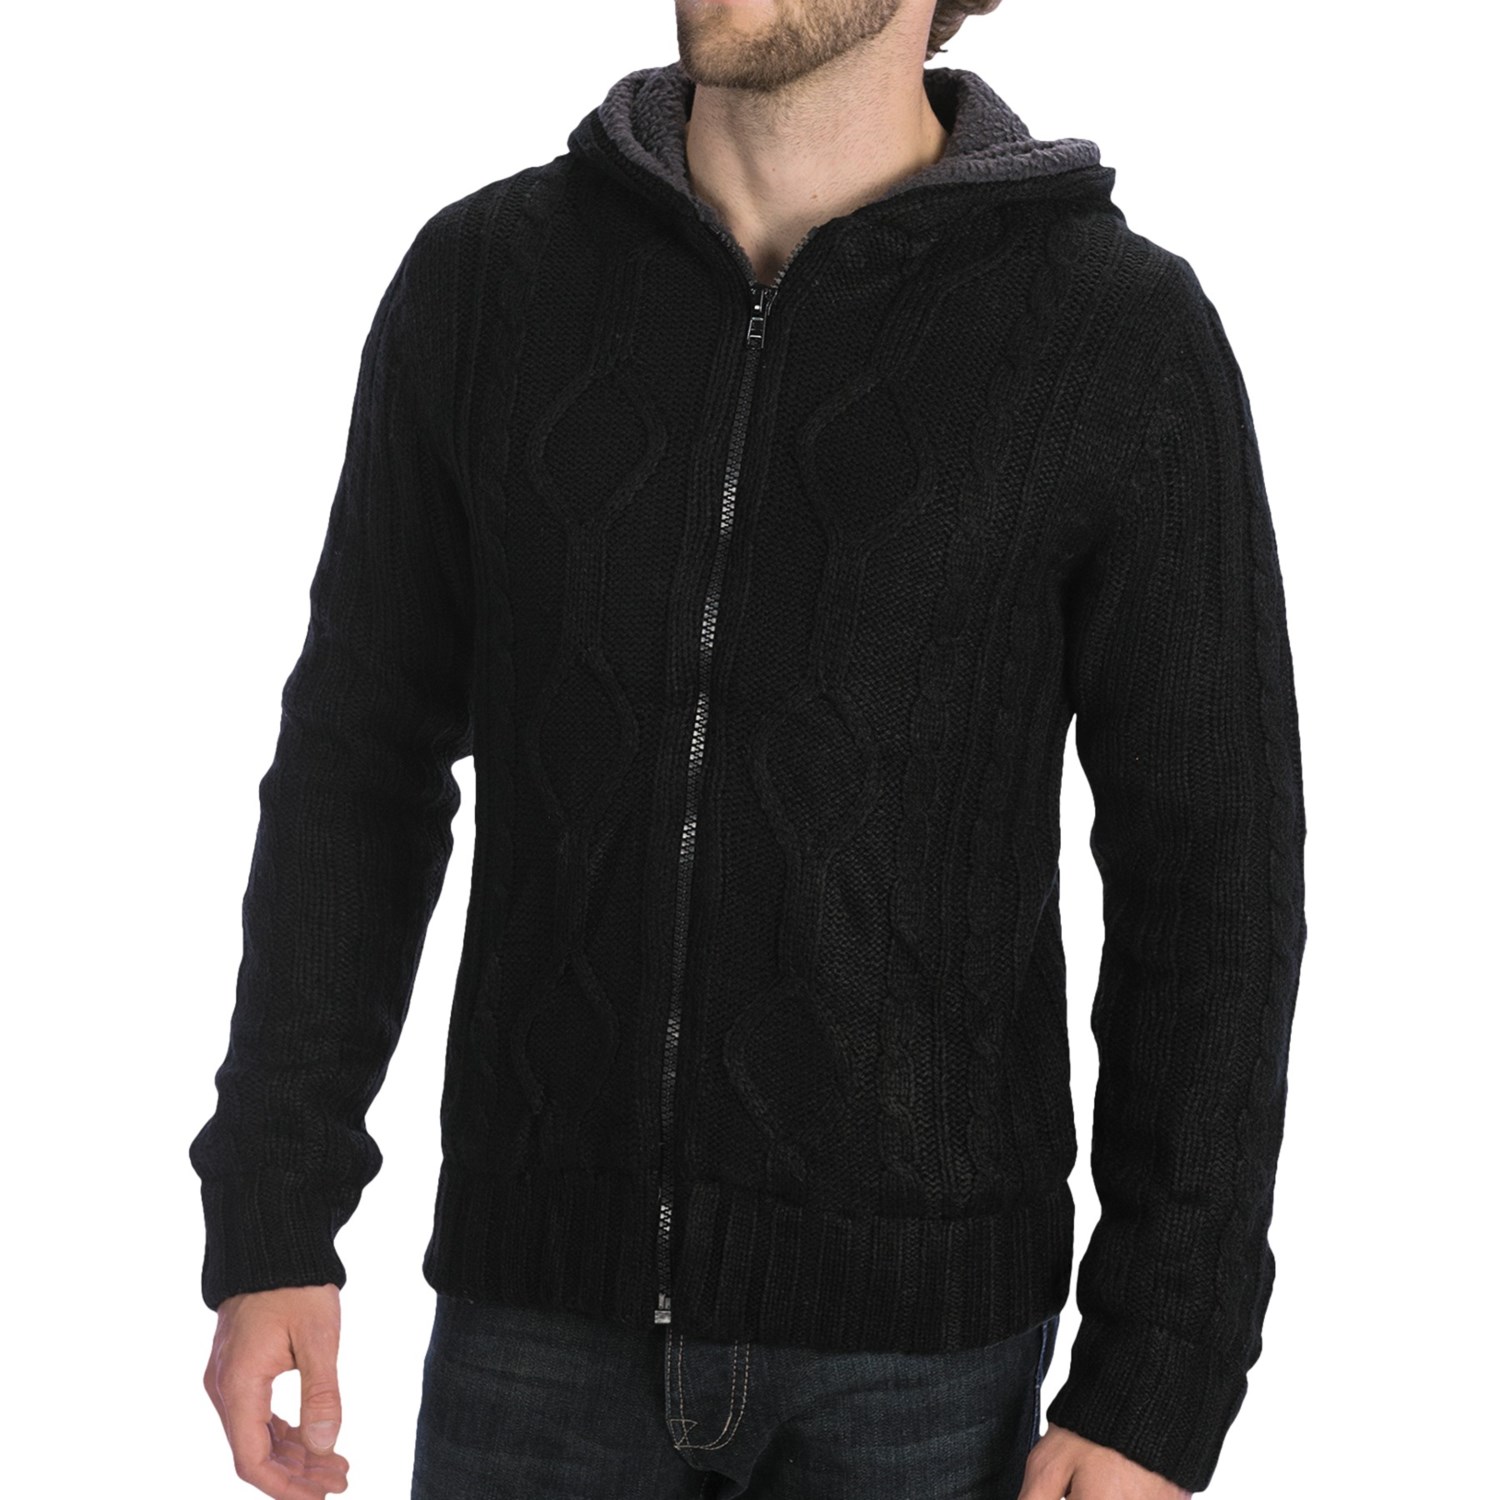 Twice Sherpa-Lined Hooded Sweater (For Men) - Save 60%